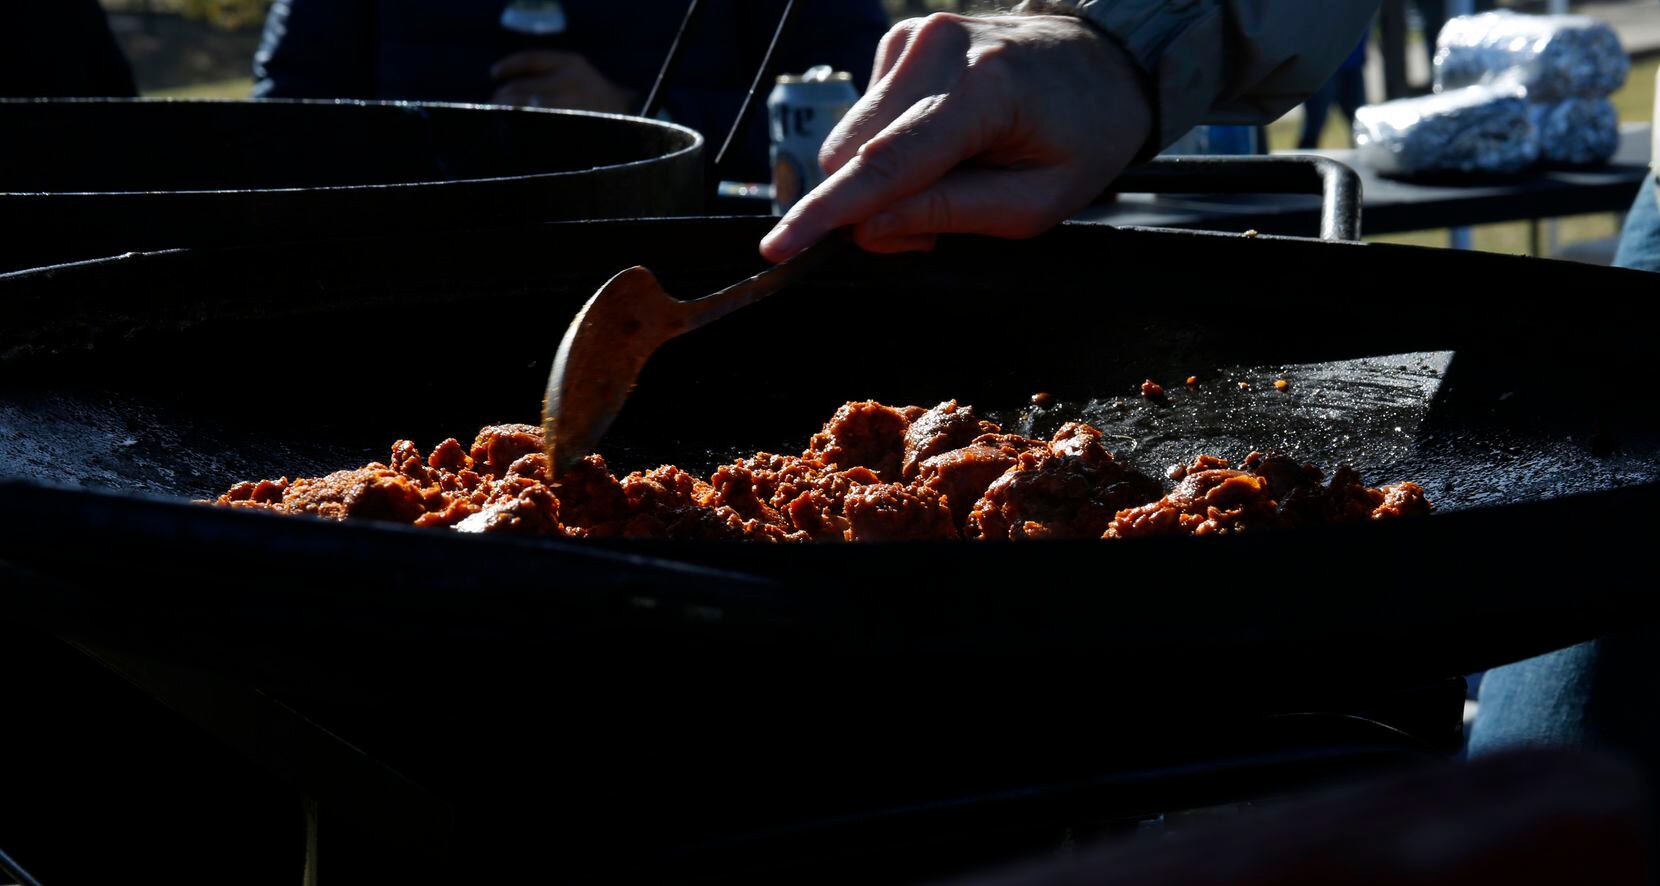 Mario Tresgonzalez store a batch of chorizo served for breakfast during a tailgating party hours before the start of the Dallas Cowboys versus Las Vegas game. The two NFL teams played their Thanksgiving Day game at AT&T Stadium in Arlington on November 25, 2021. (Steve Hamm/ Special Contributor)